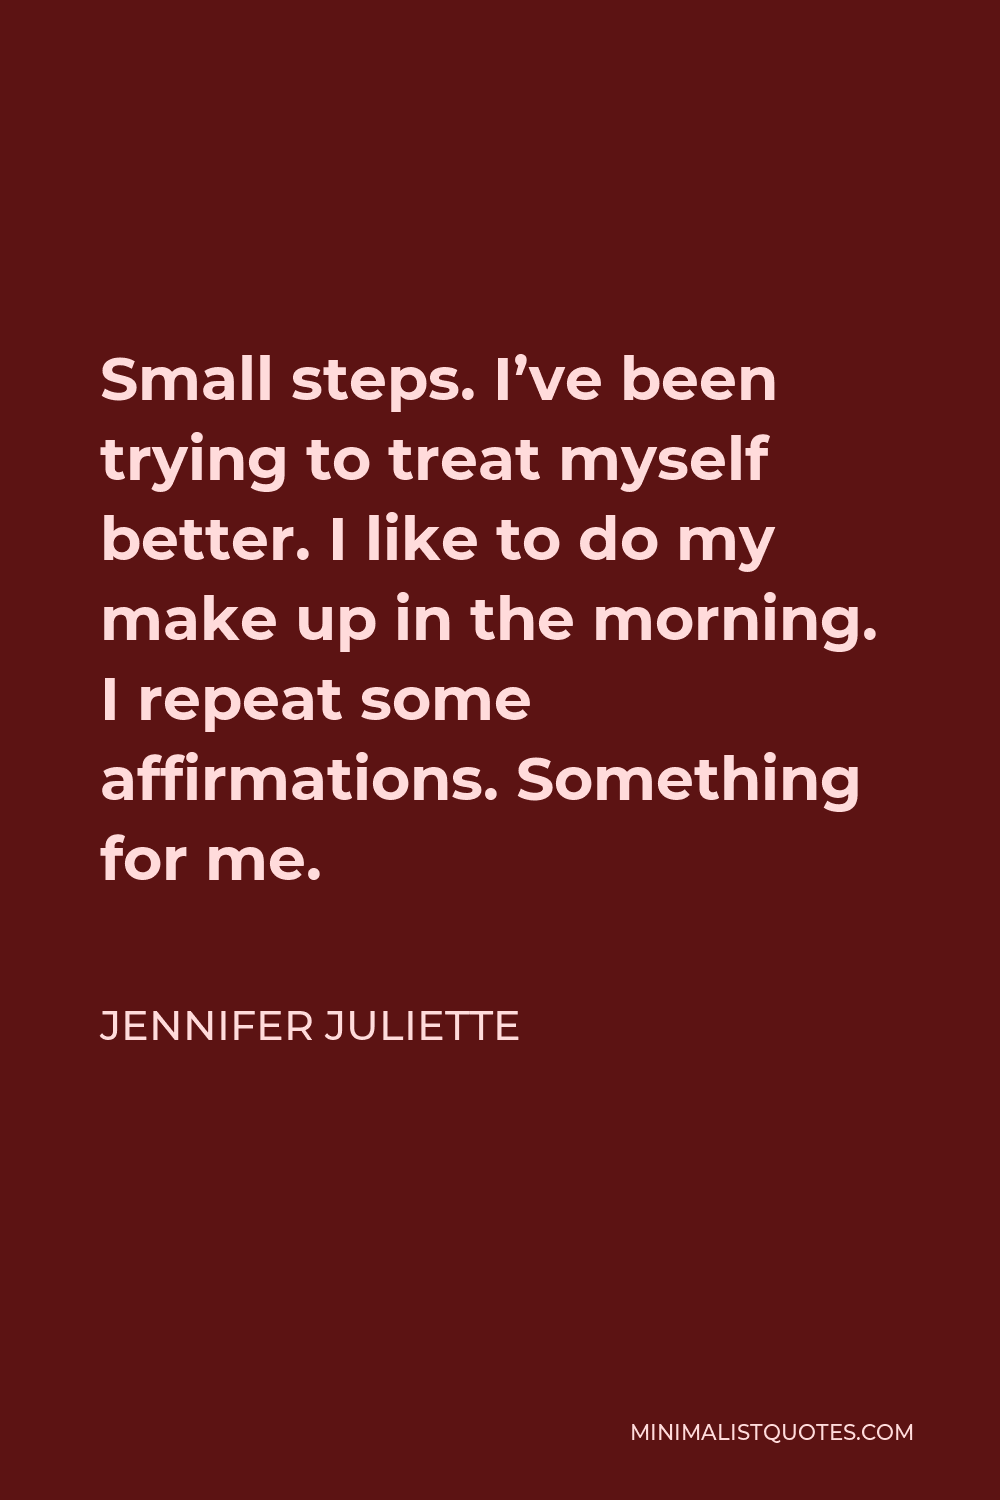 Jennifer Juliette Quote - Small steps. I’ve been trying to treat myself better. I like to do my make up in the morning. I repeat some affirmations. Something for me.